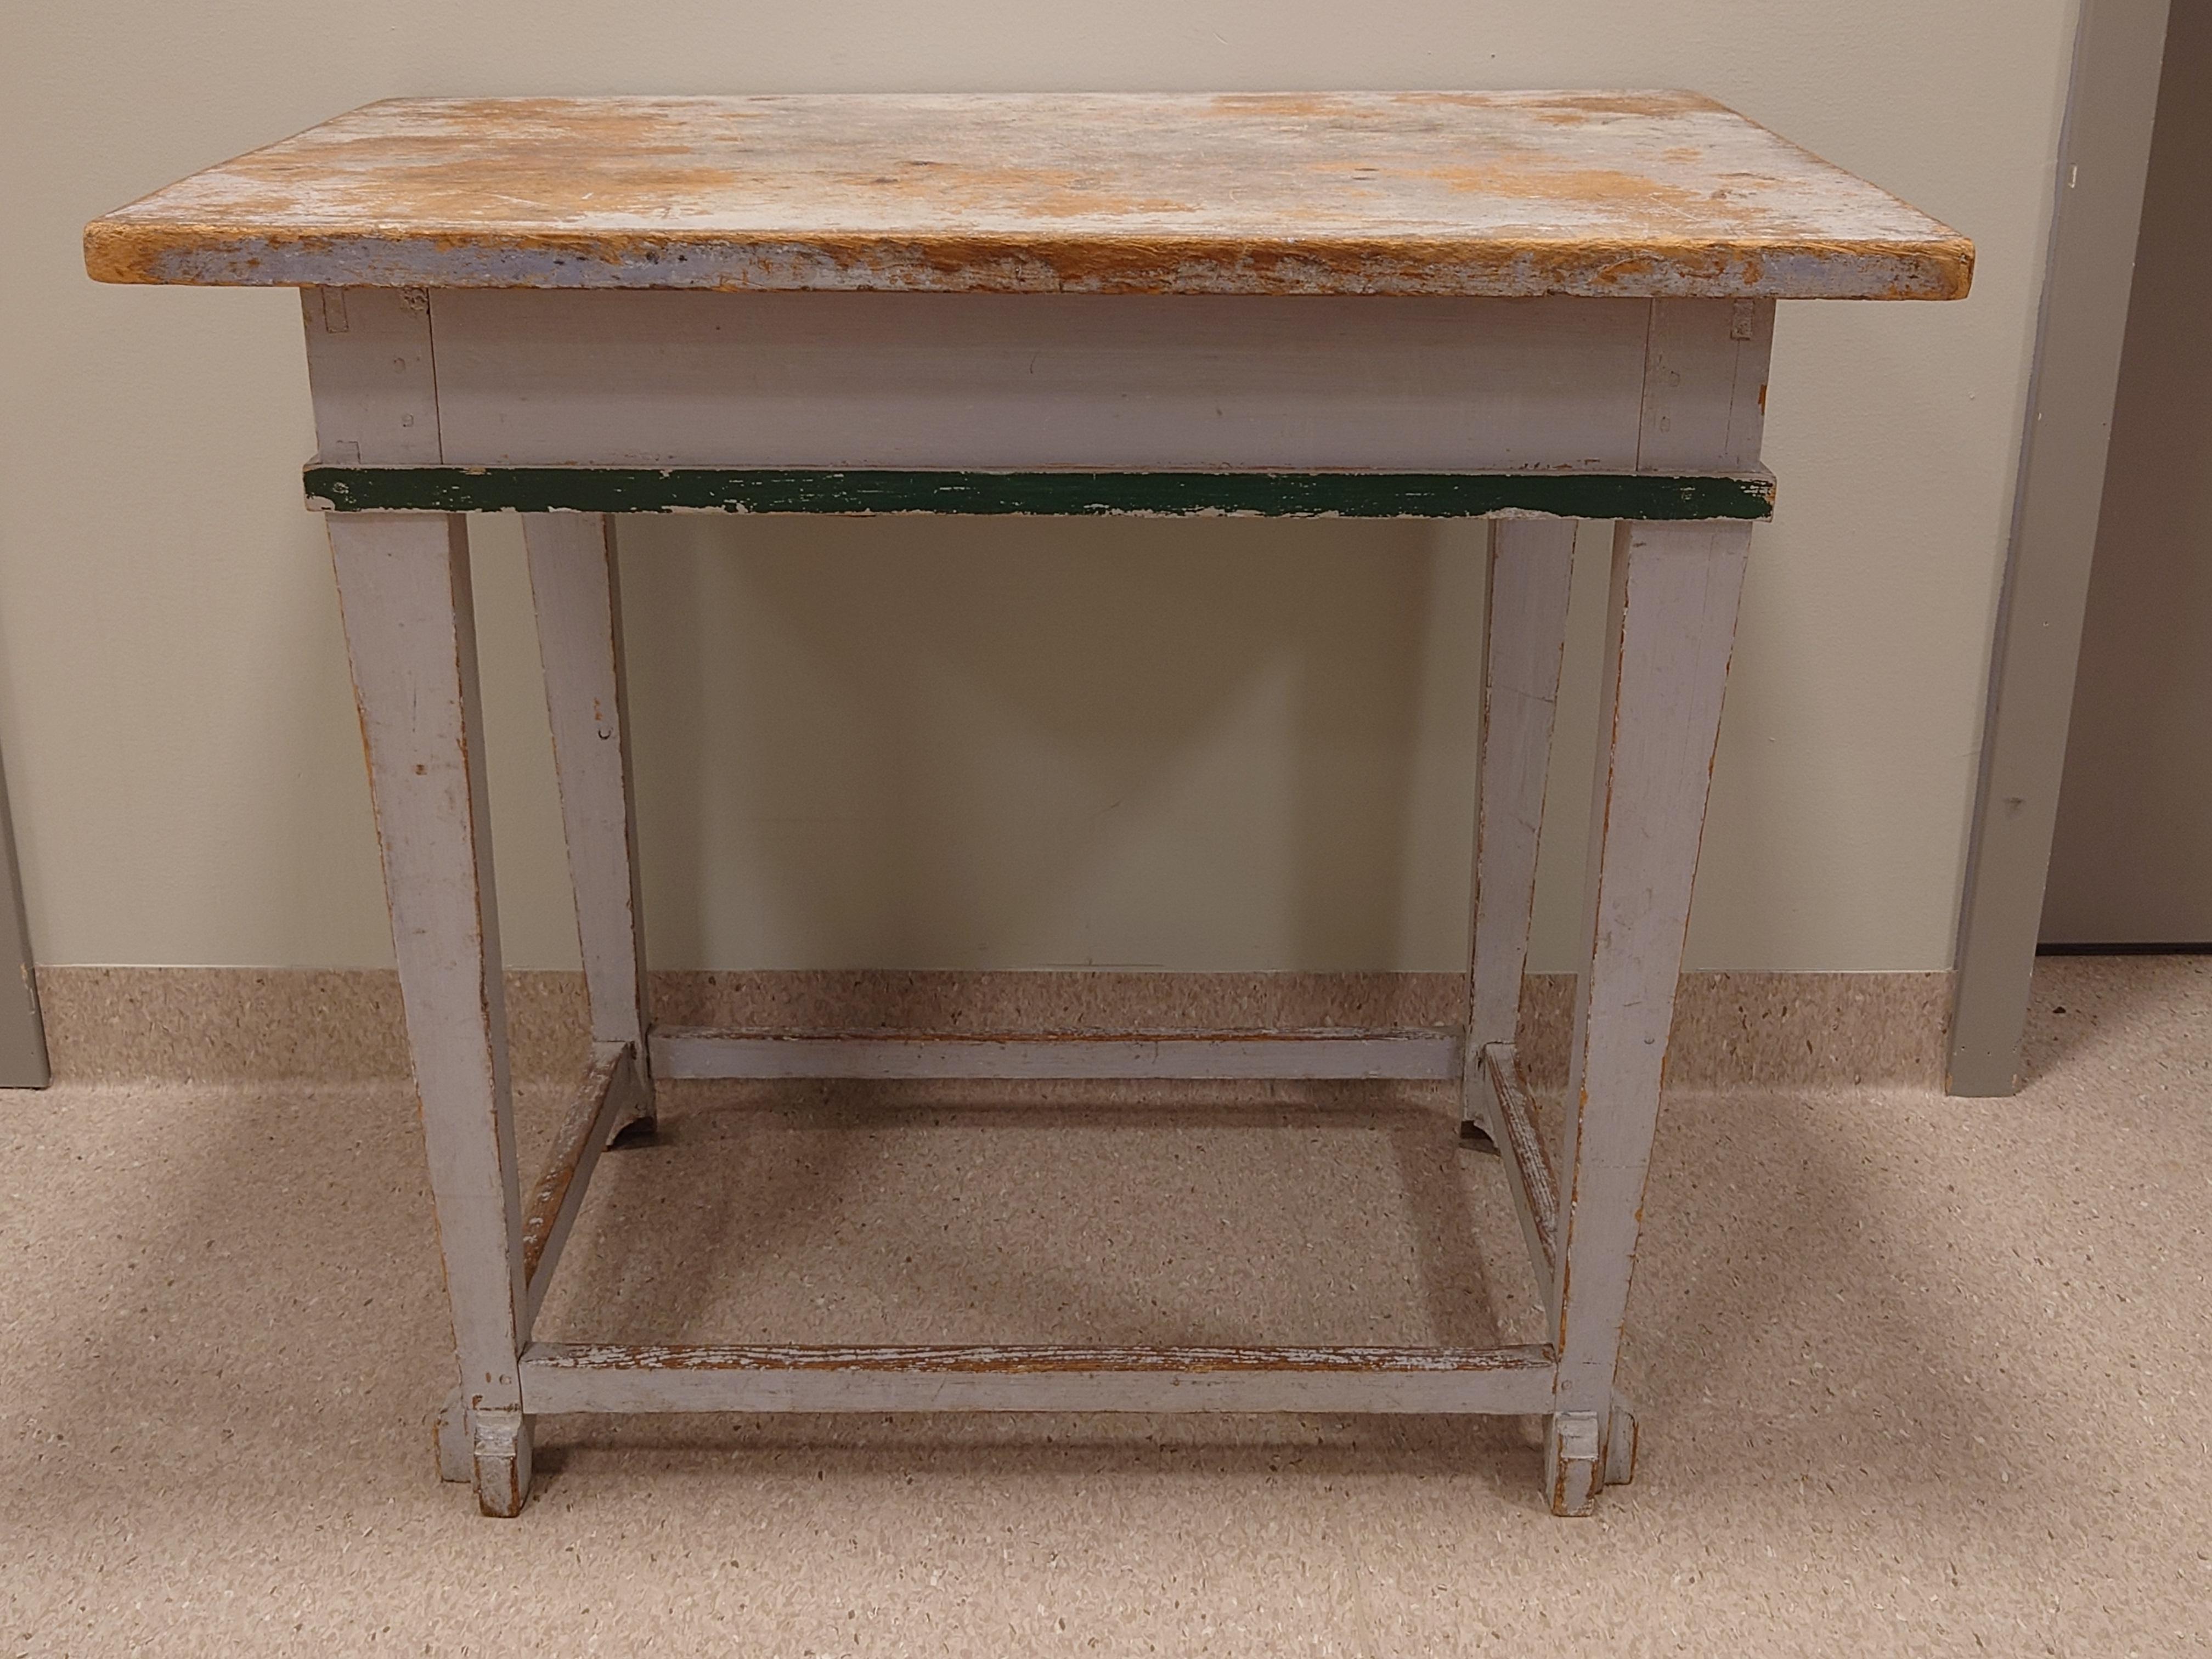 19th Century antique provincial Gustavian table from Skellefteå Västerbotten,Northern Sweden.
It has original condition with original untouched paint.
Fine color combination with gray & green.
The legs are connected at the bottom.
The legs has